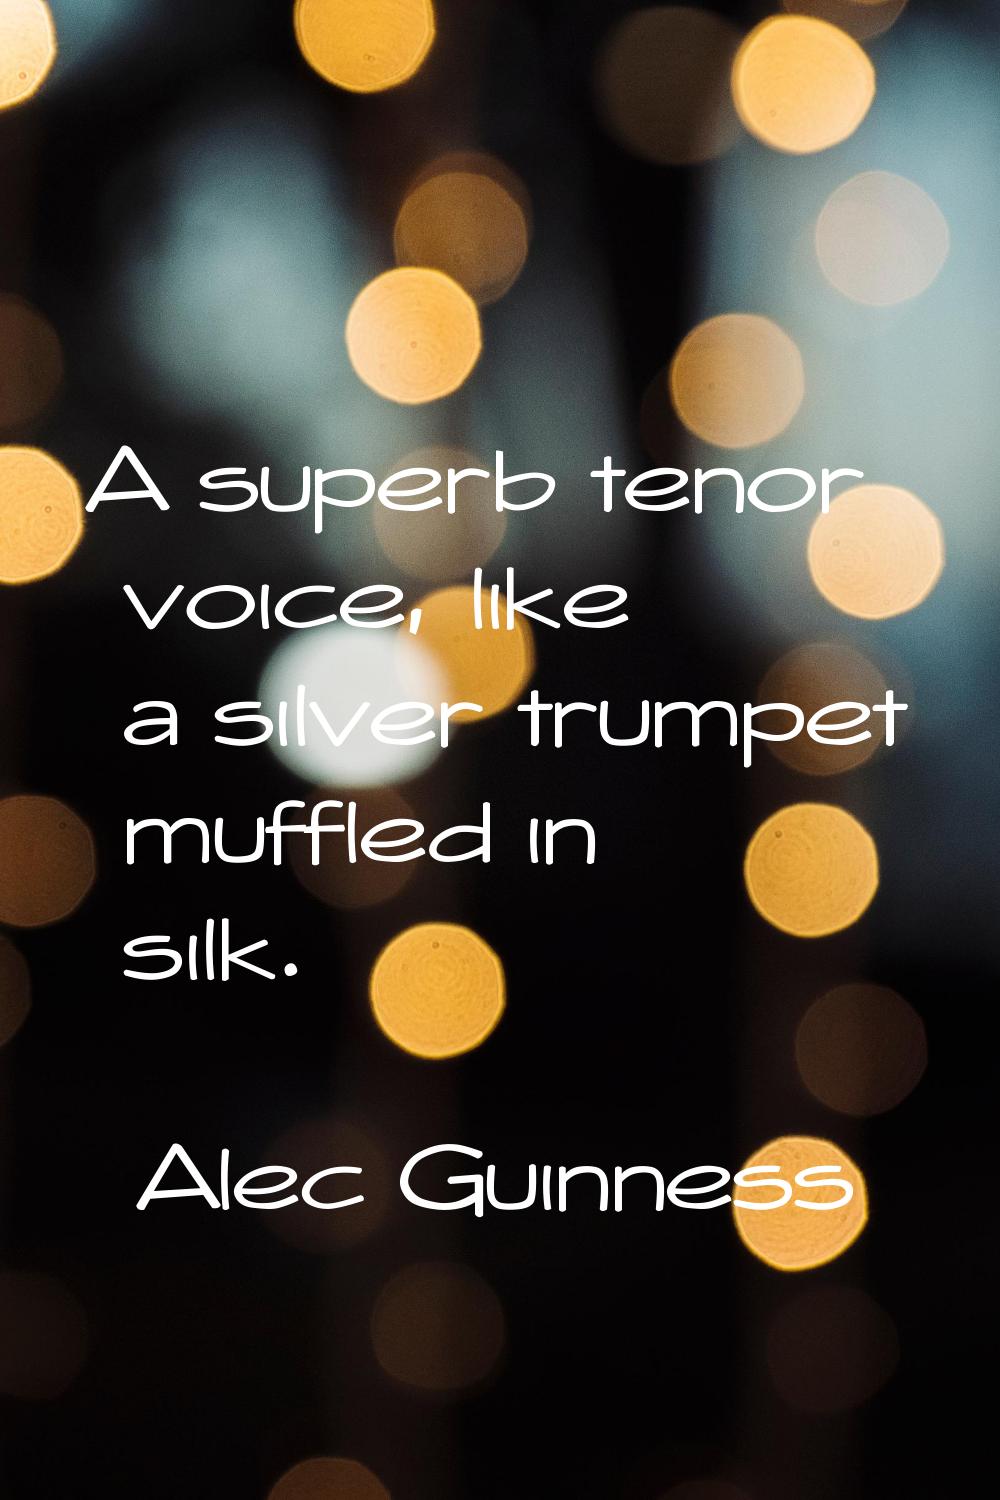 A superb tenor voice, like a silver trumpet muffled in silk.